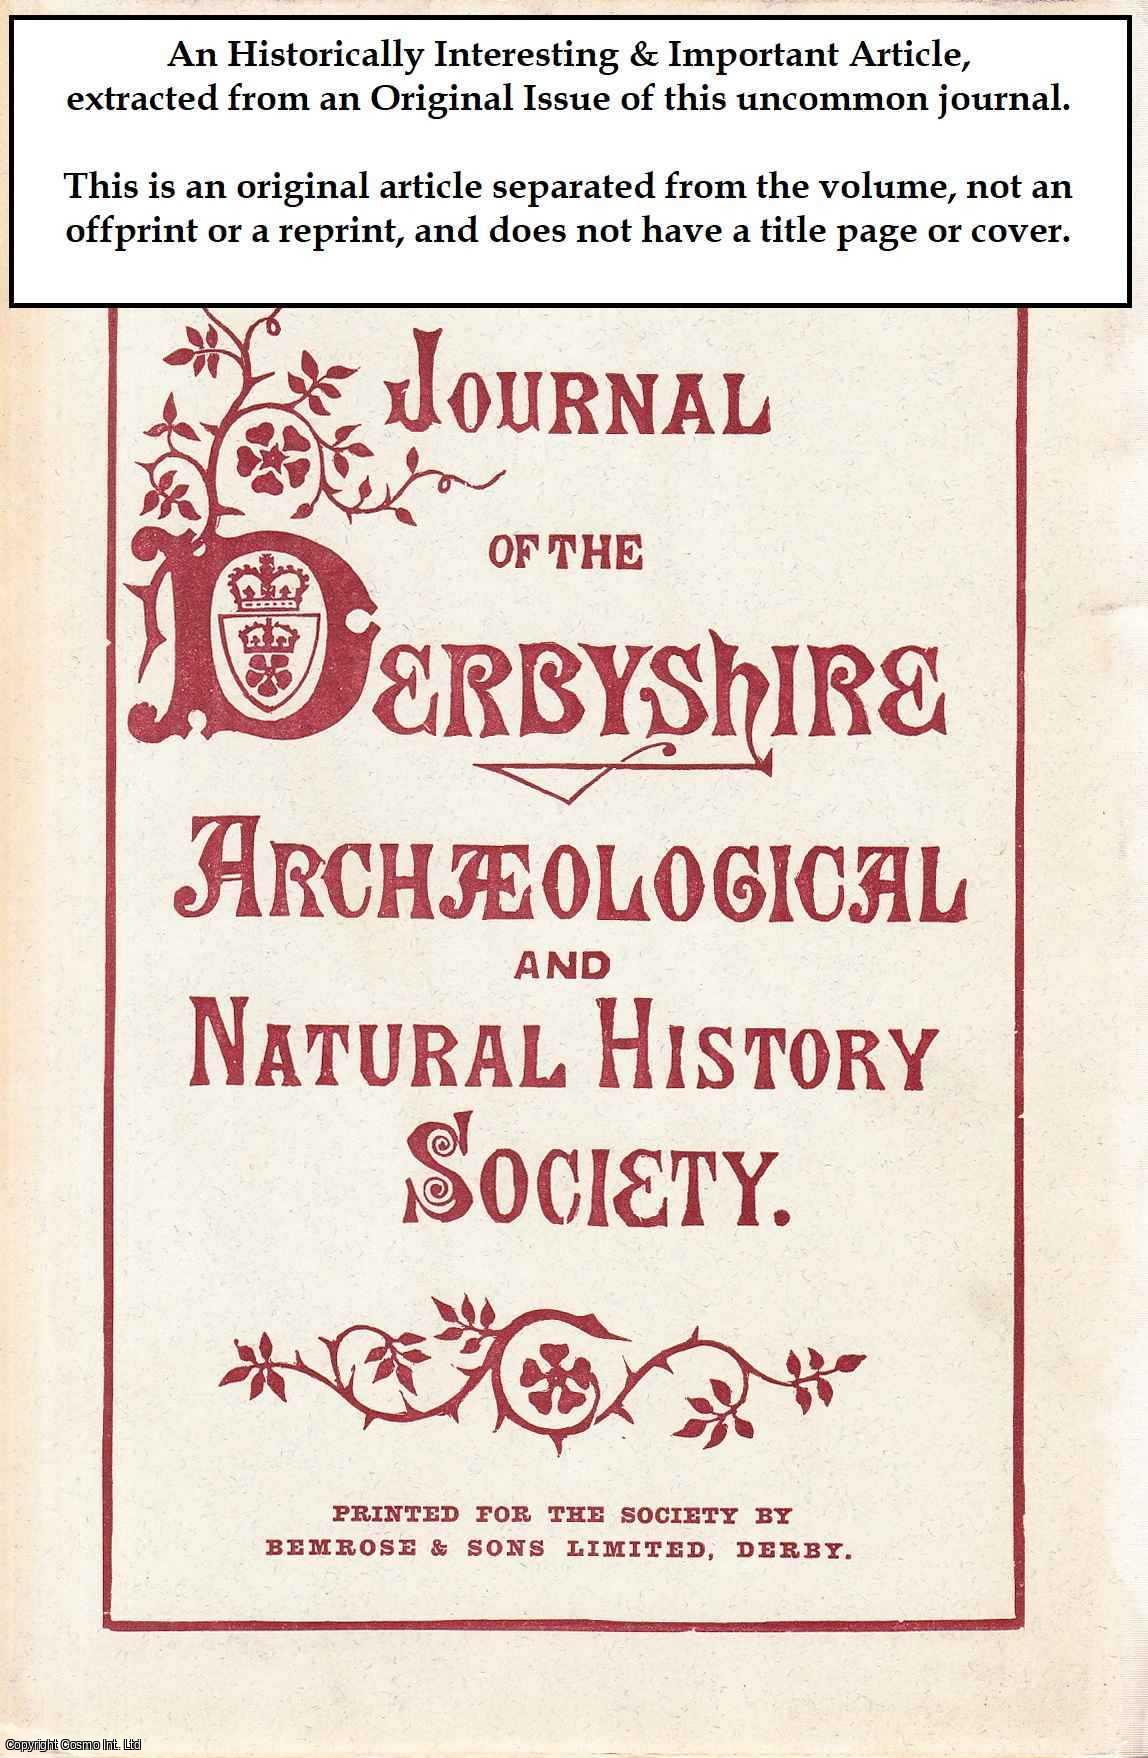 J. Charles Cox - The Abbey of Dale. An original article from the Journal of the Derbyshire Archaeological & Natural History Society, 1918.